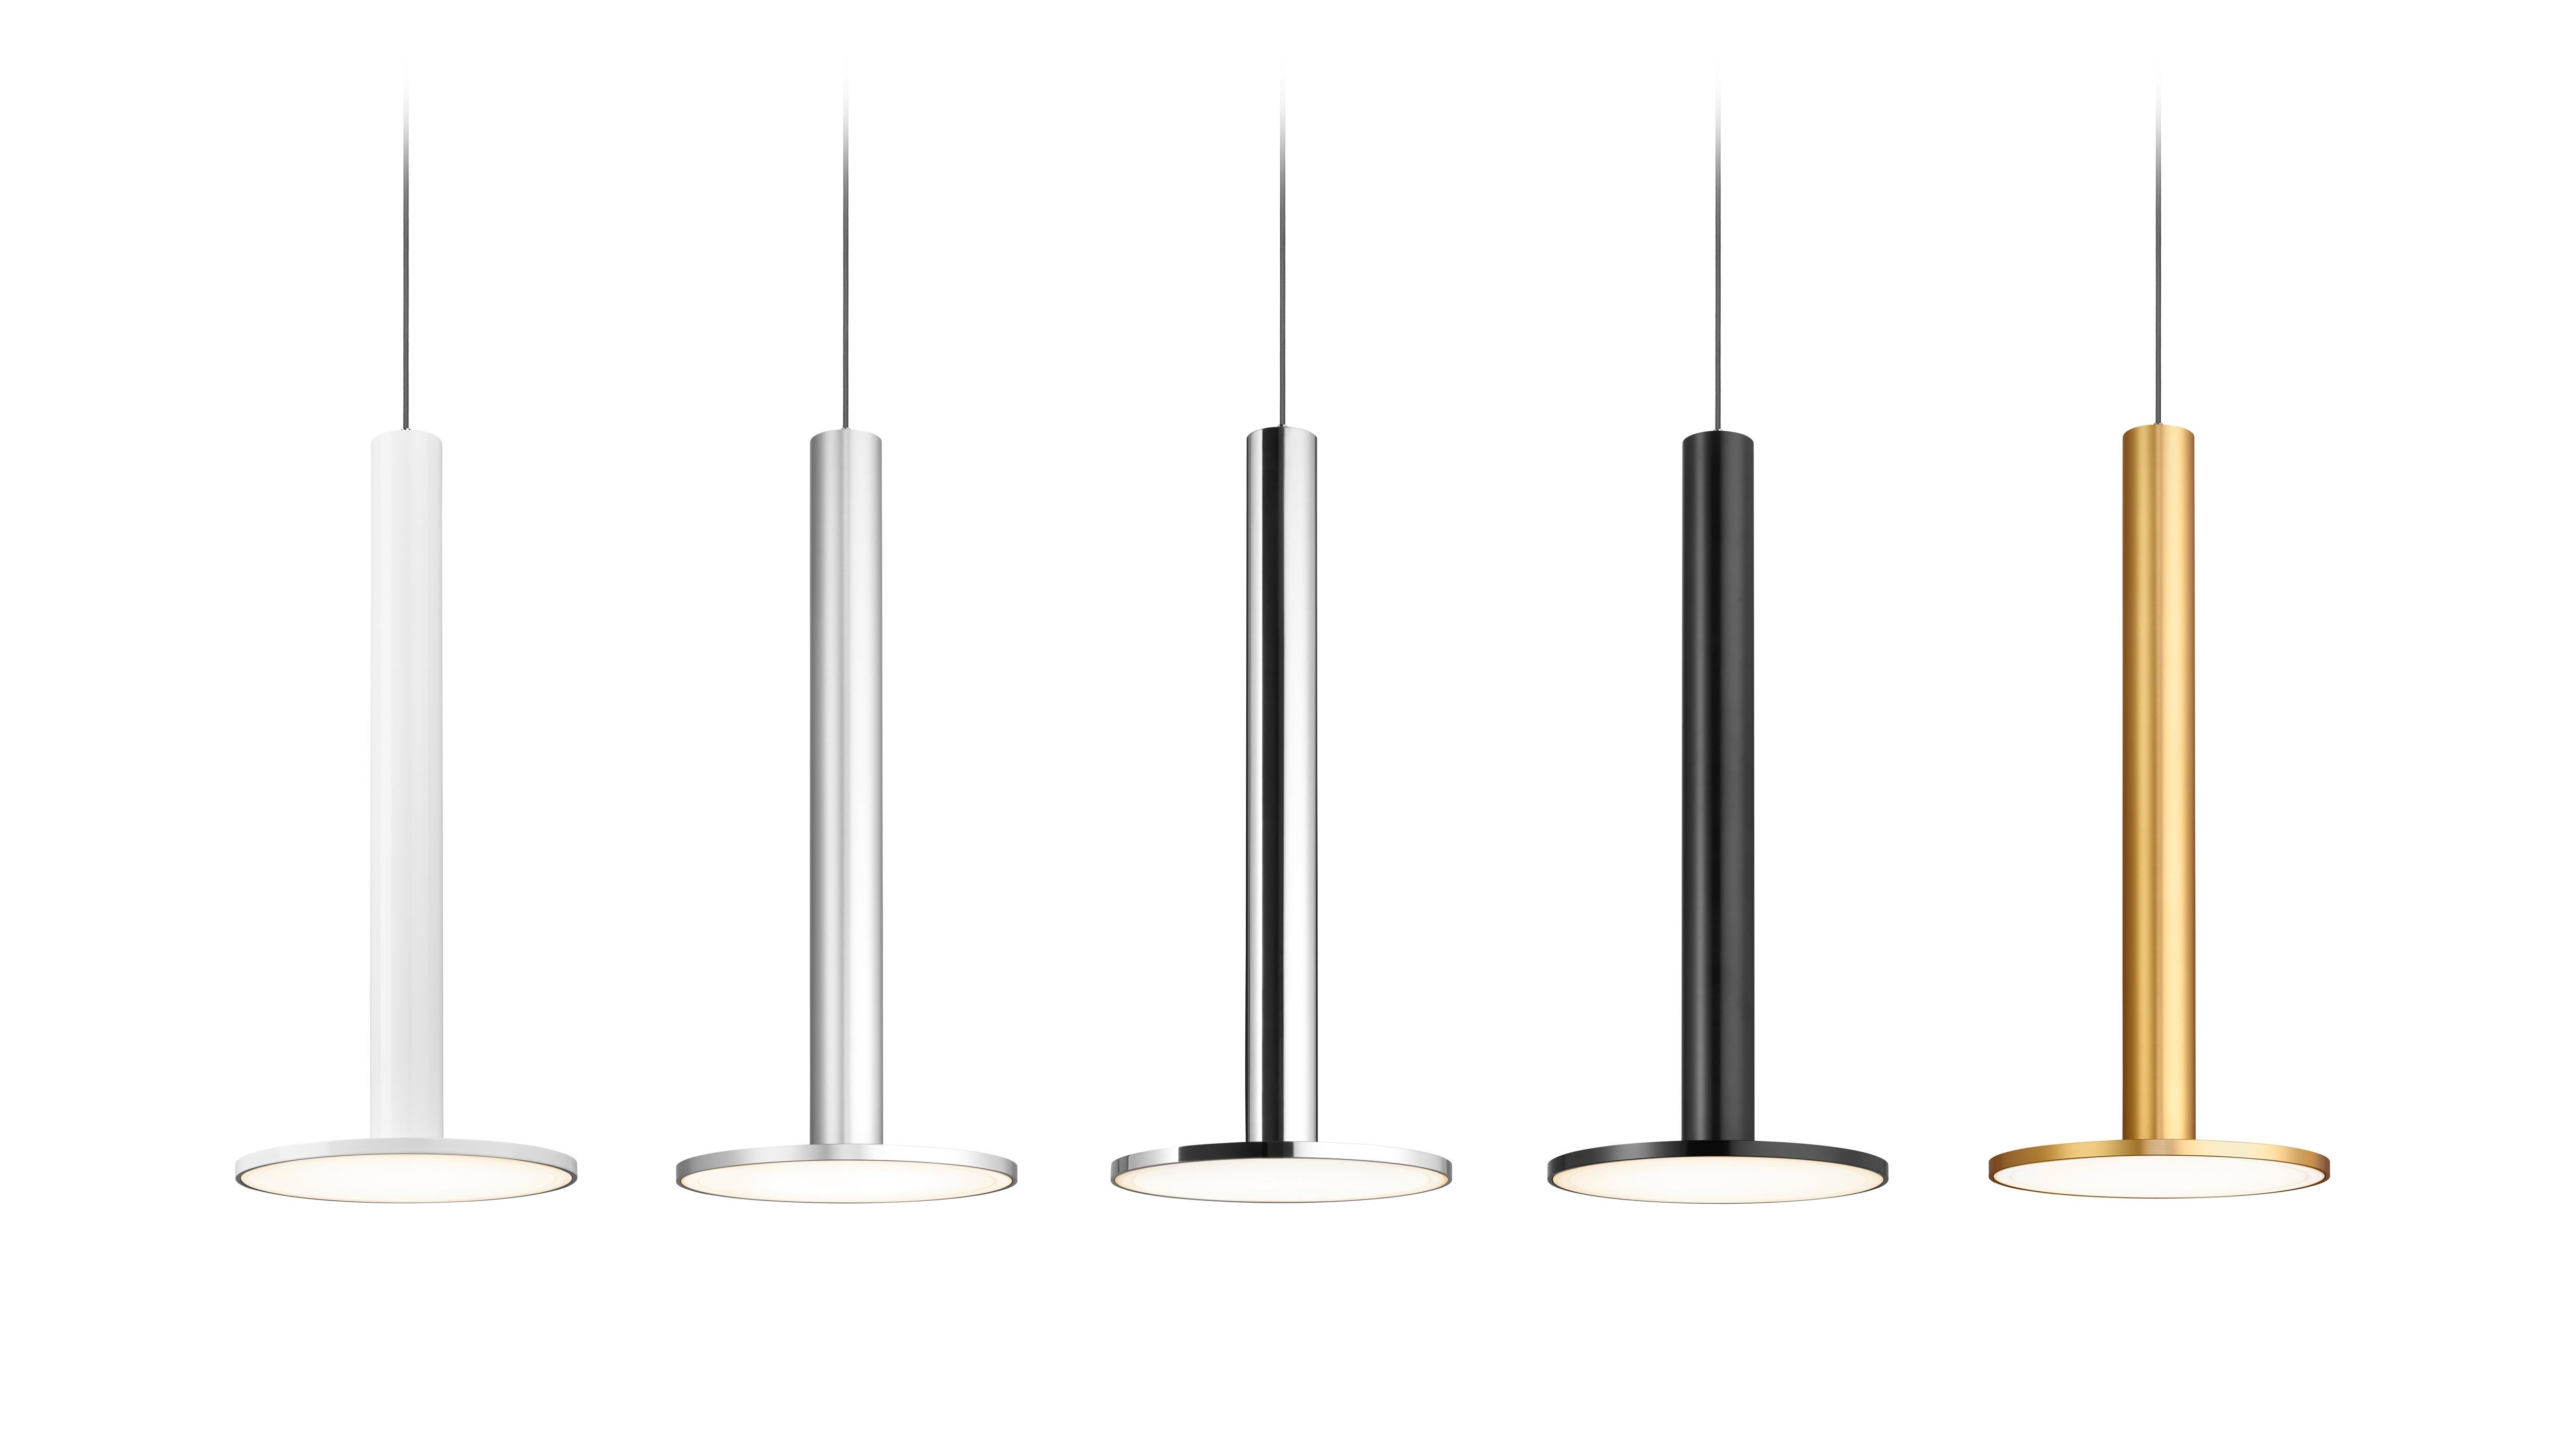 The minimalist Cielo pendant series is expanding to include the stunning new Cielo XL, a taller and slimmer design offering premium machined aluminium finishes and boasting a warm and brilliant 1200 lumen output. Cielo XL is scaled perfectly for